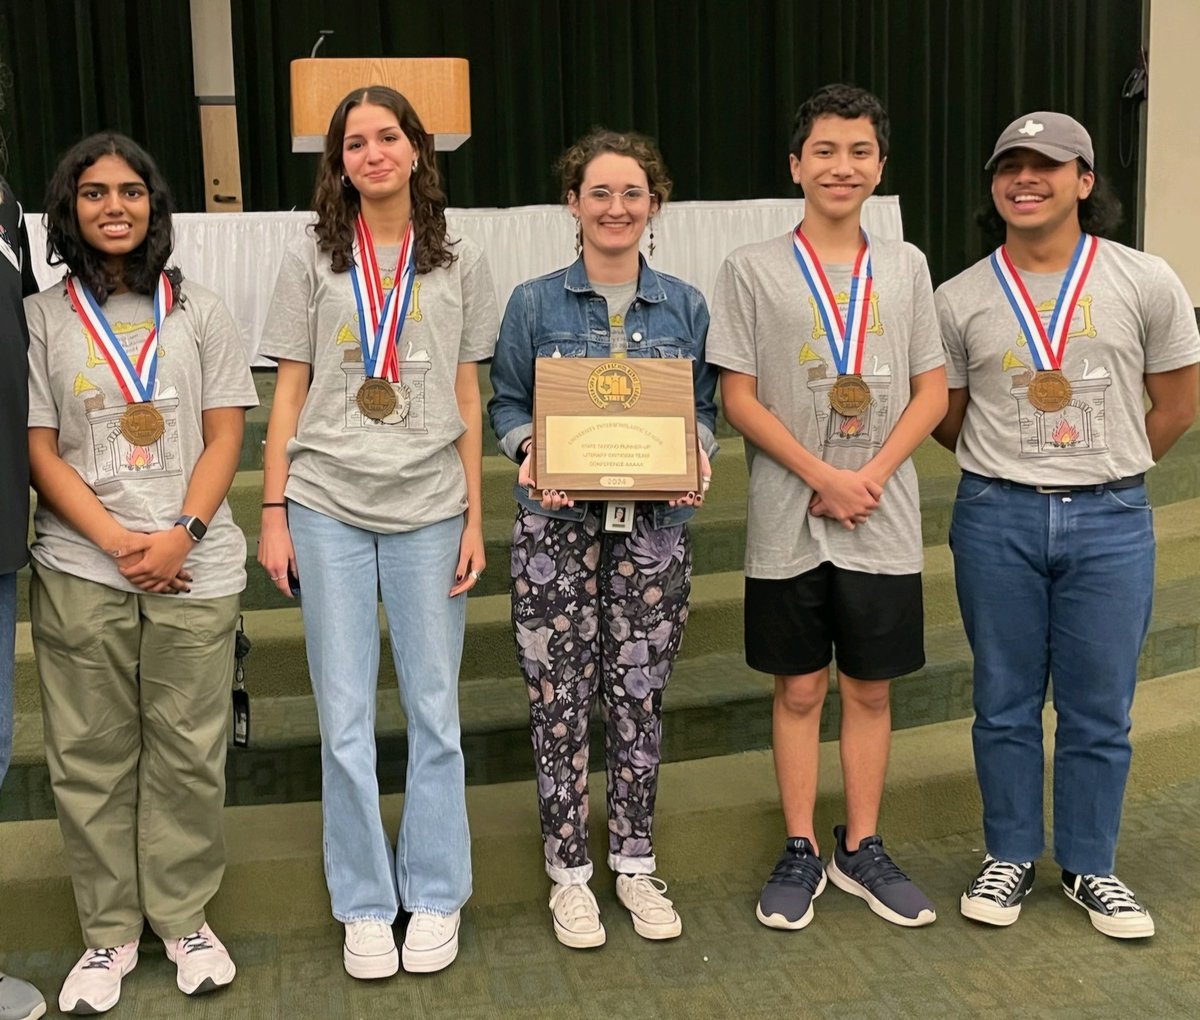 UIL Academics State Meet Results… Hannah Saad took the individual silver medal in Literary Criticism, and the team of JC Haub, Hannah Saad, Neha Gandra, and Simon Alvarez won 3rd place overall! Coached by Jordan Smith. @pfisd